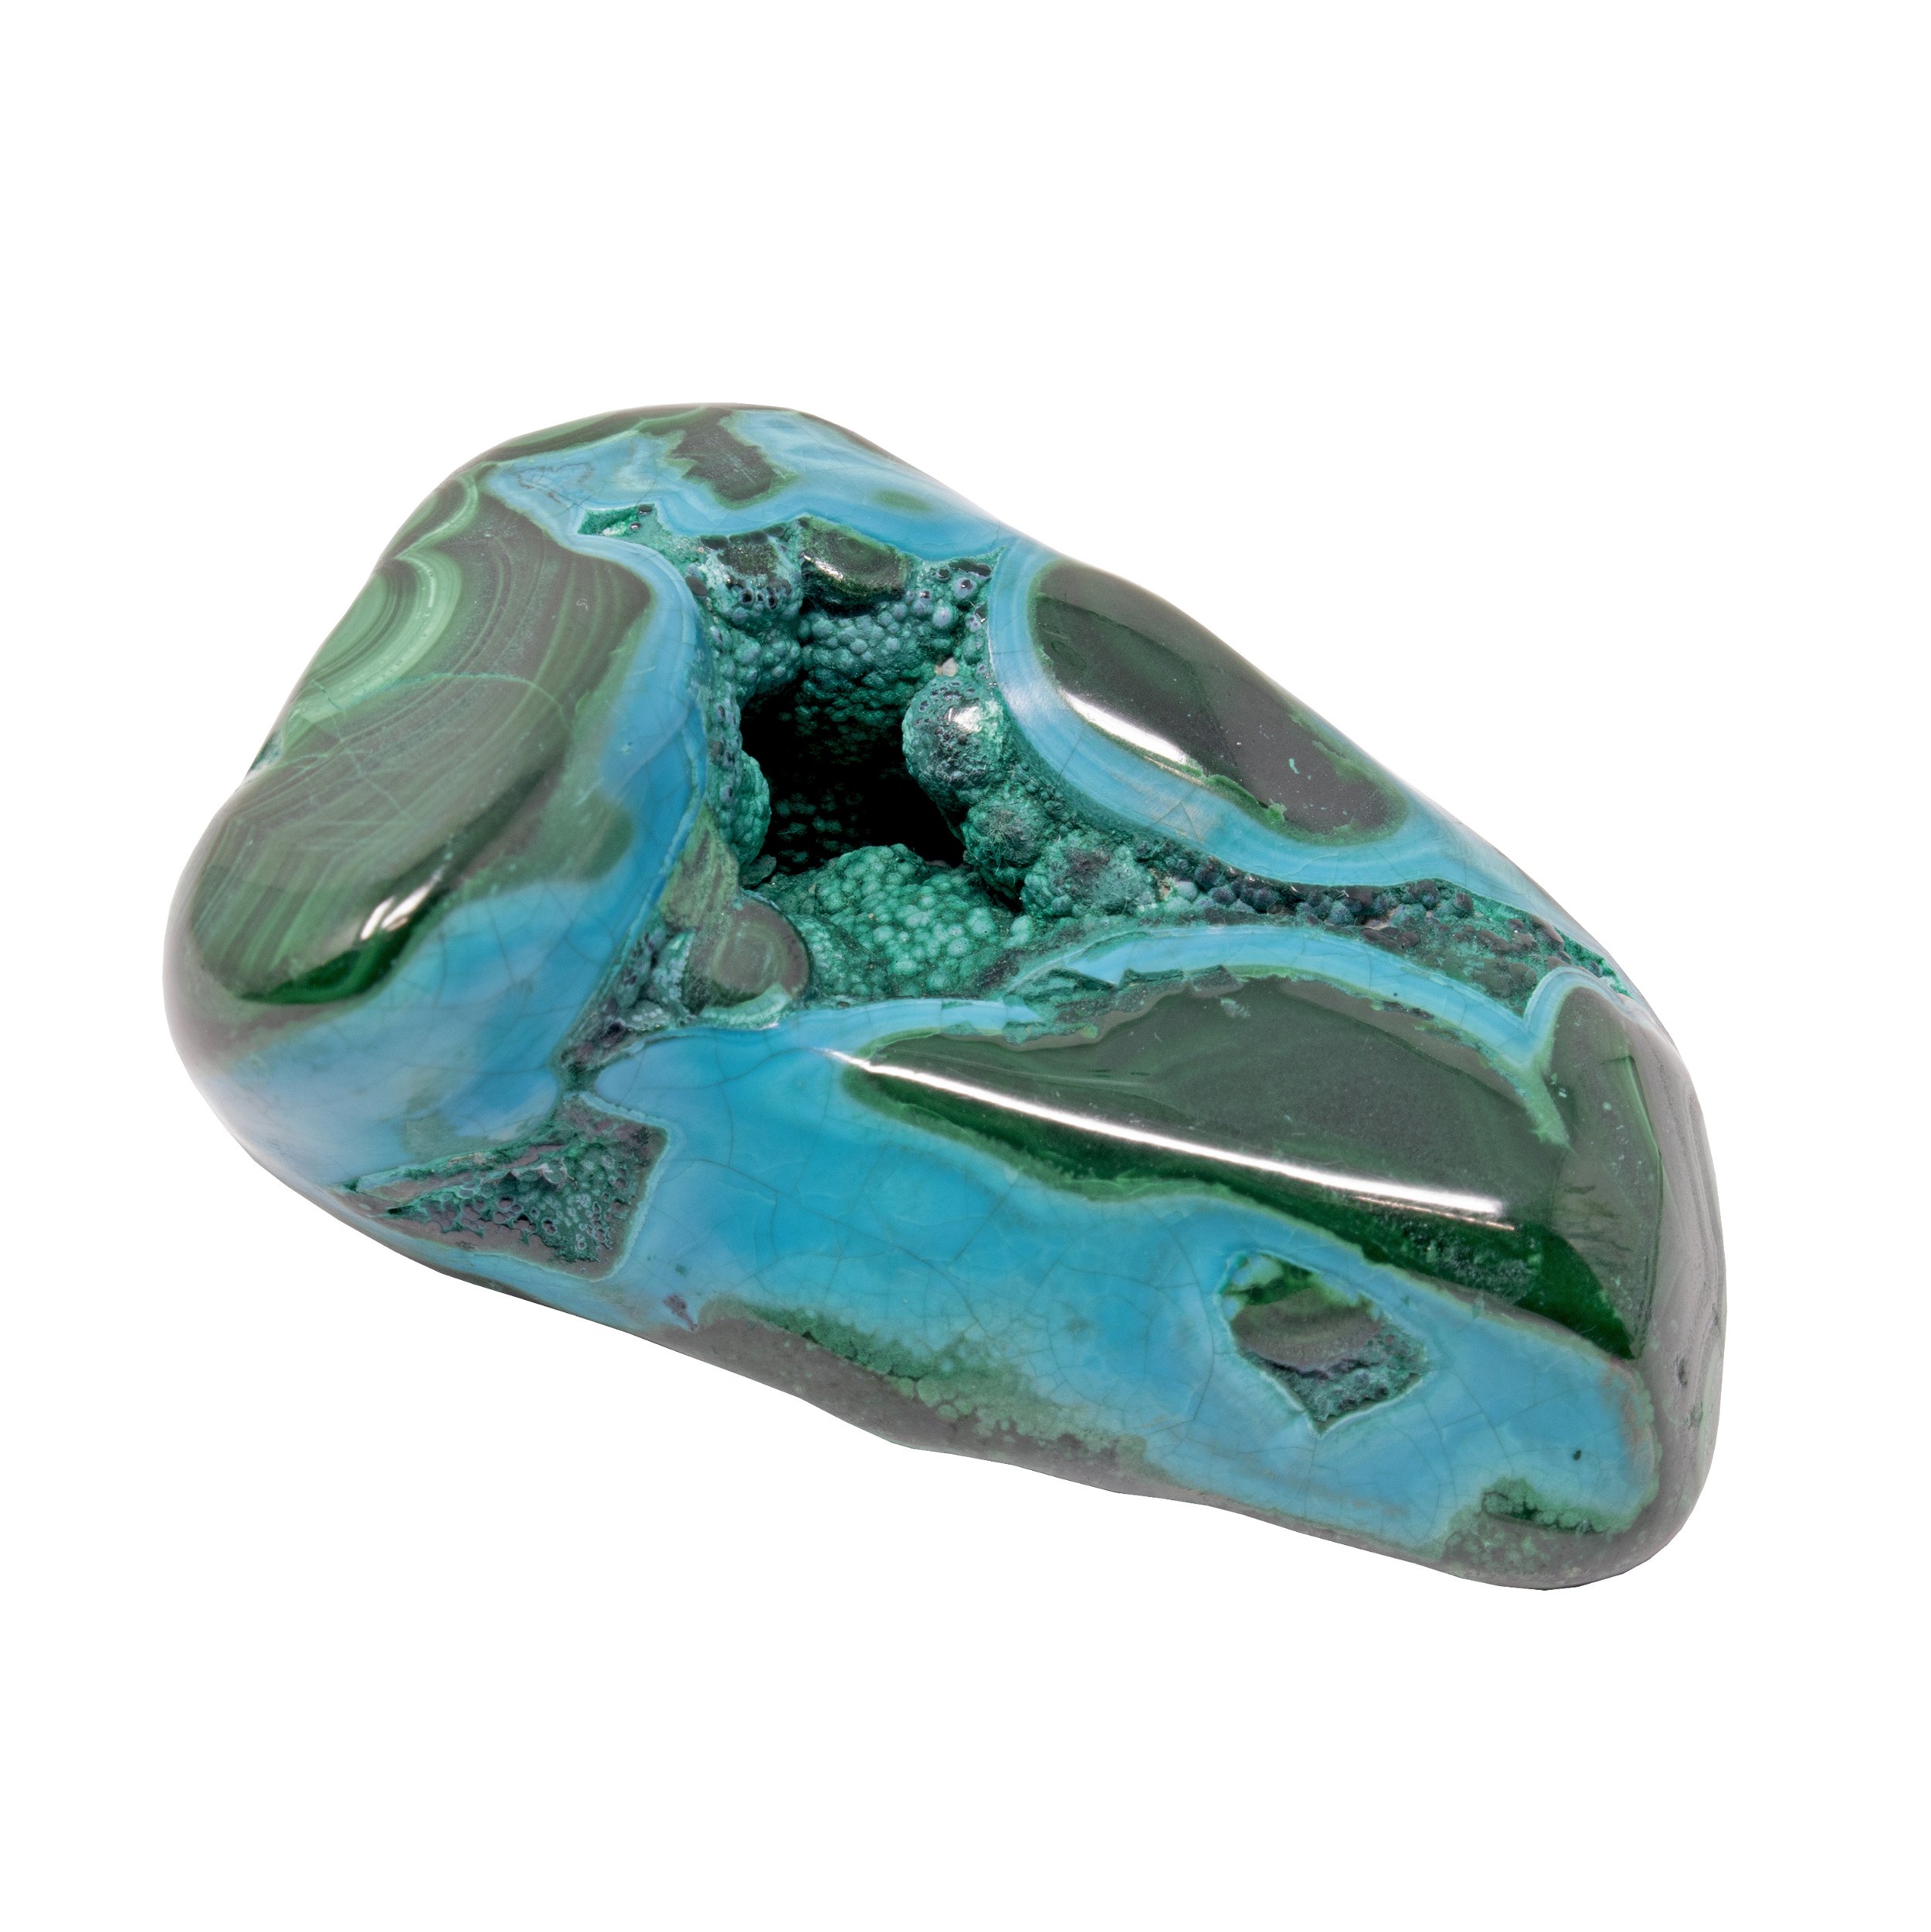 Chrysocolla Malachite Freeform Polished - Open Cavern In The Middle